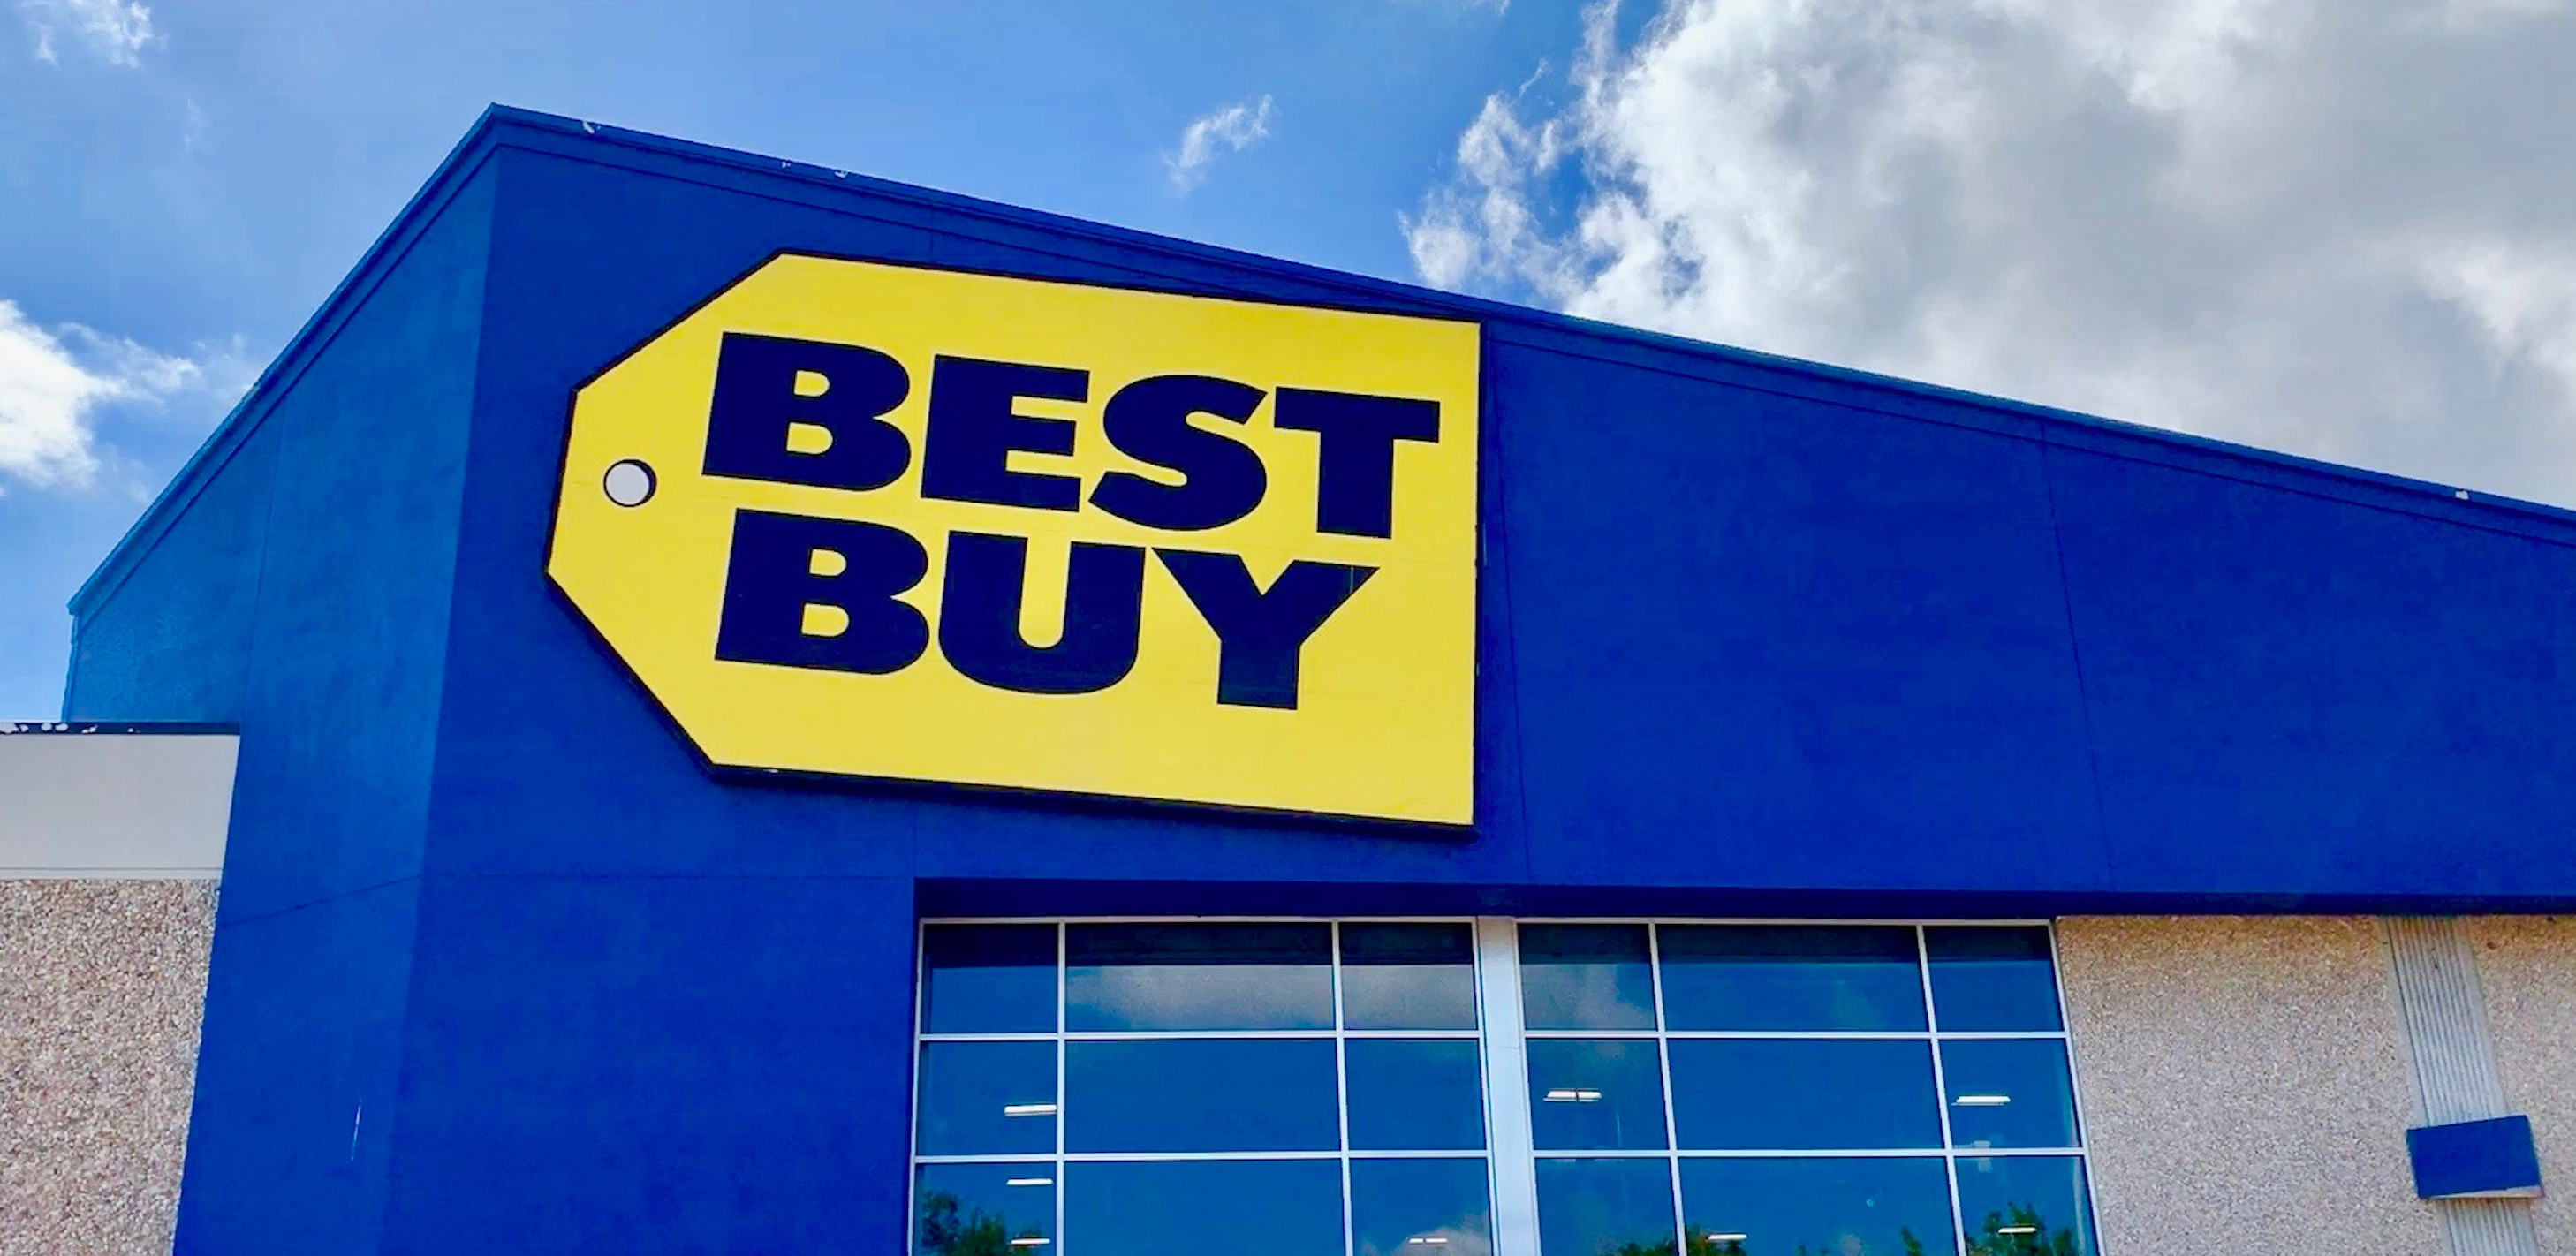 Don T Overpay At Best Buy Wikibuy Can Save You Money Wikibuy